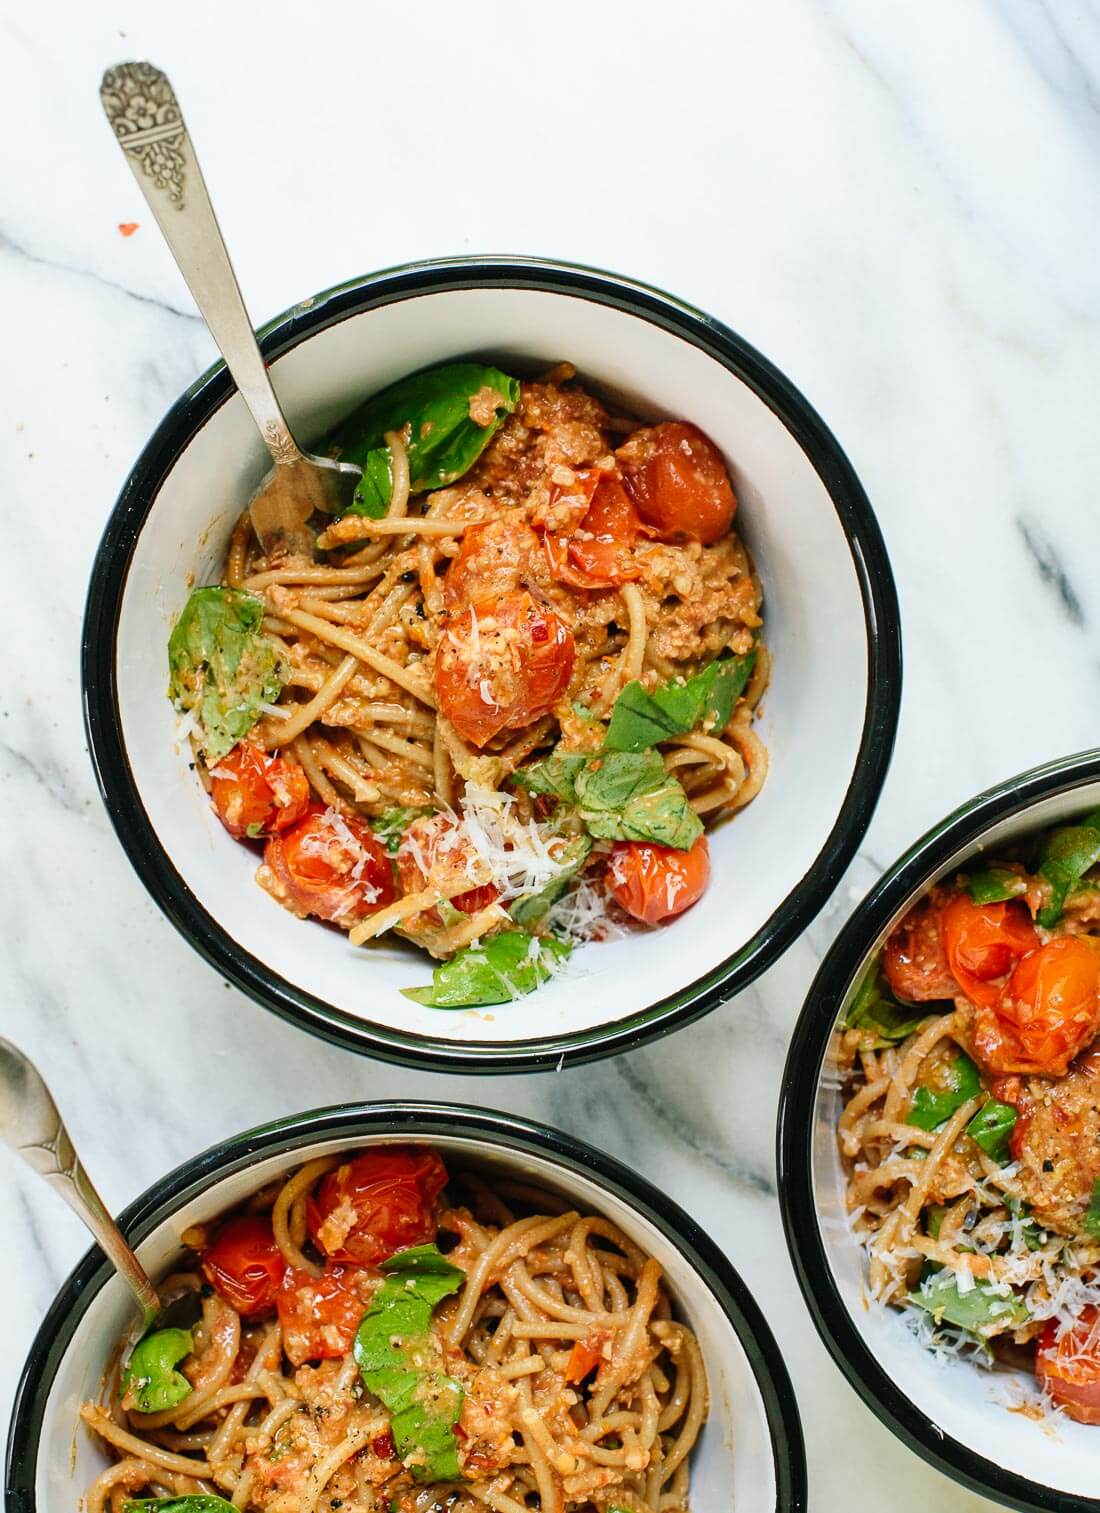 Amazing tomato pesto with basil and pasta, a light but filling summer meal - cookieandkate.com